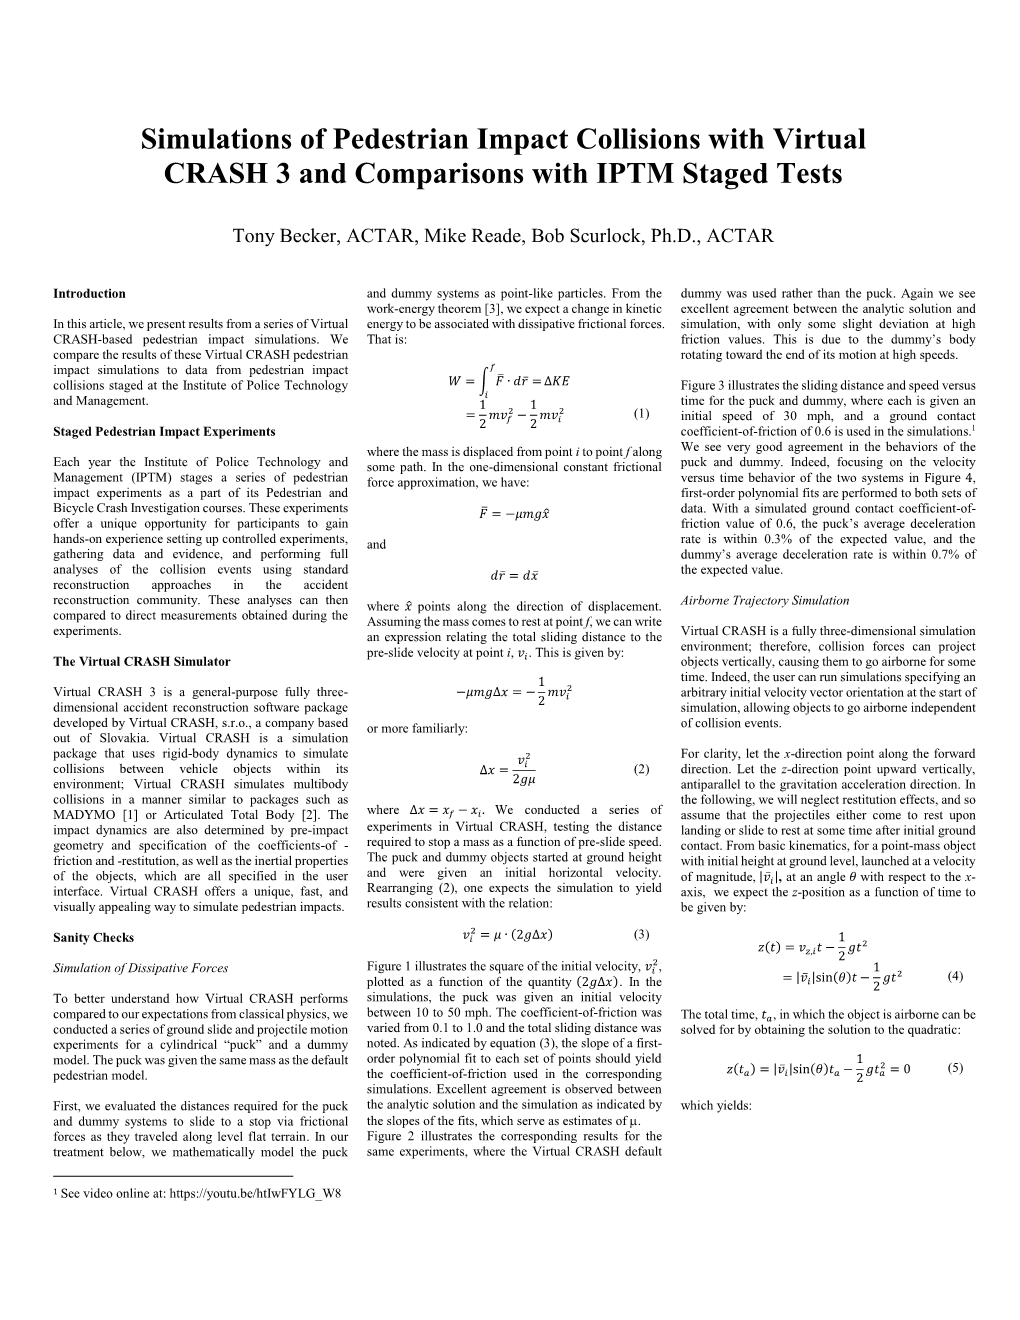 Simulations of Pedestrian Impact Collisions with Virtual CRASH 3 and Comparisons with IPTM Staged Tests